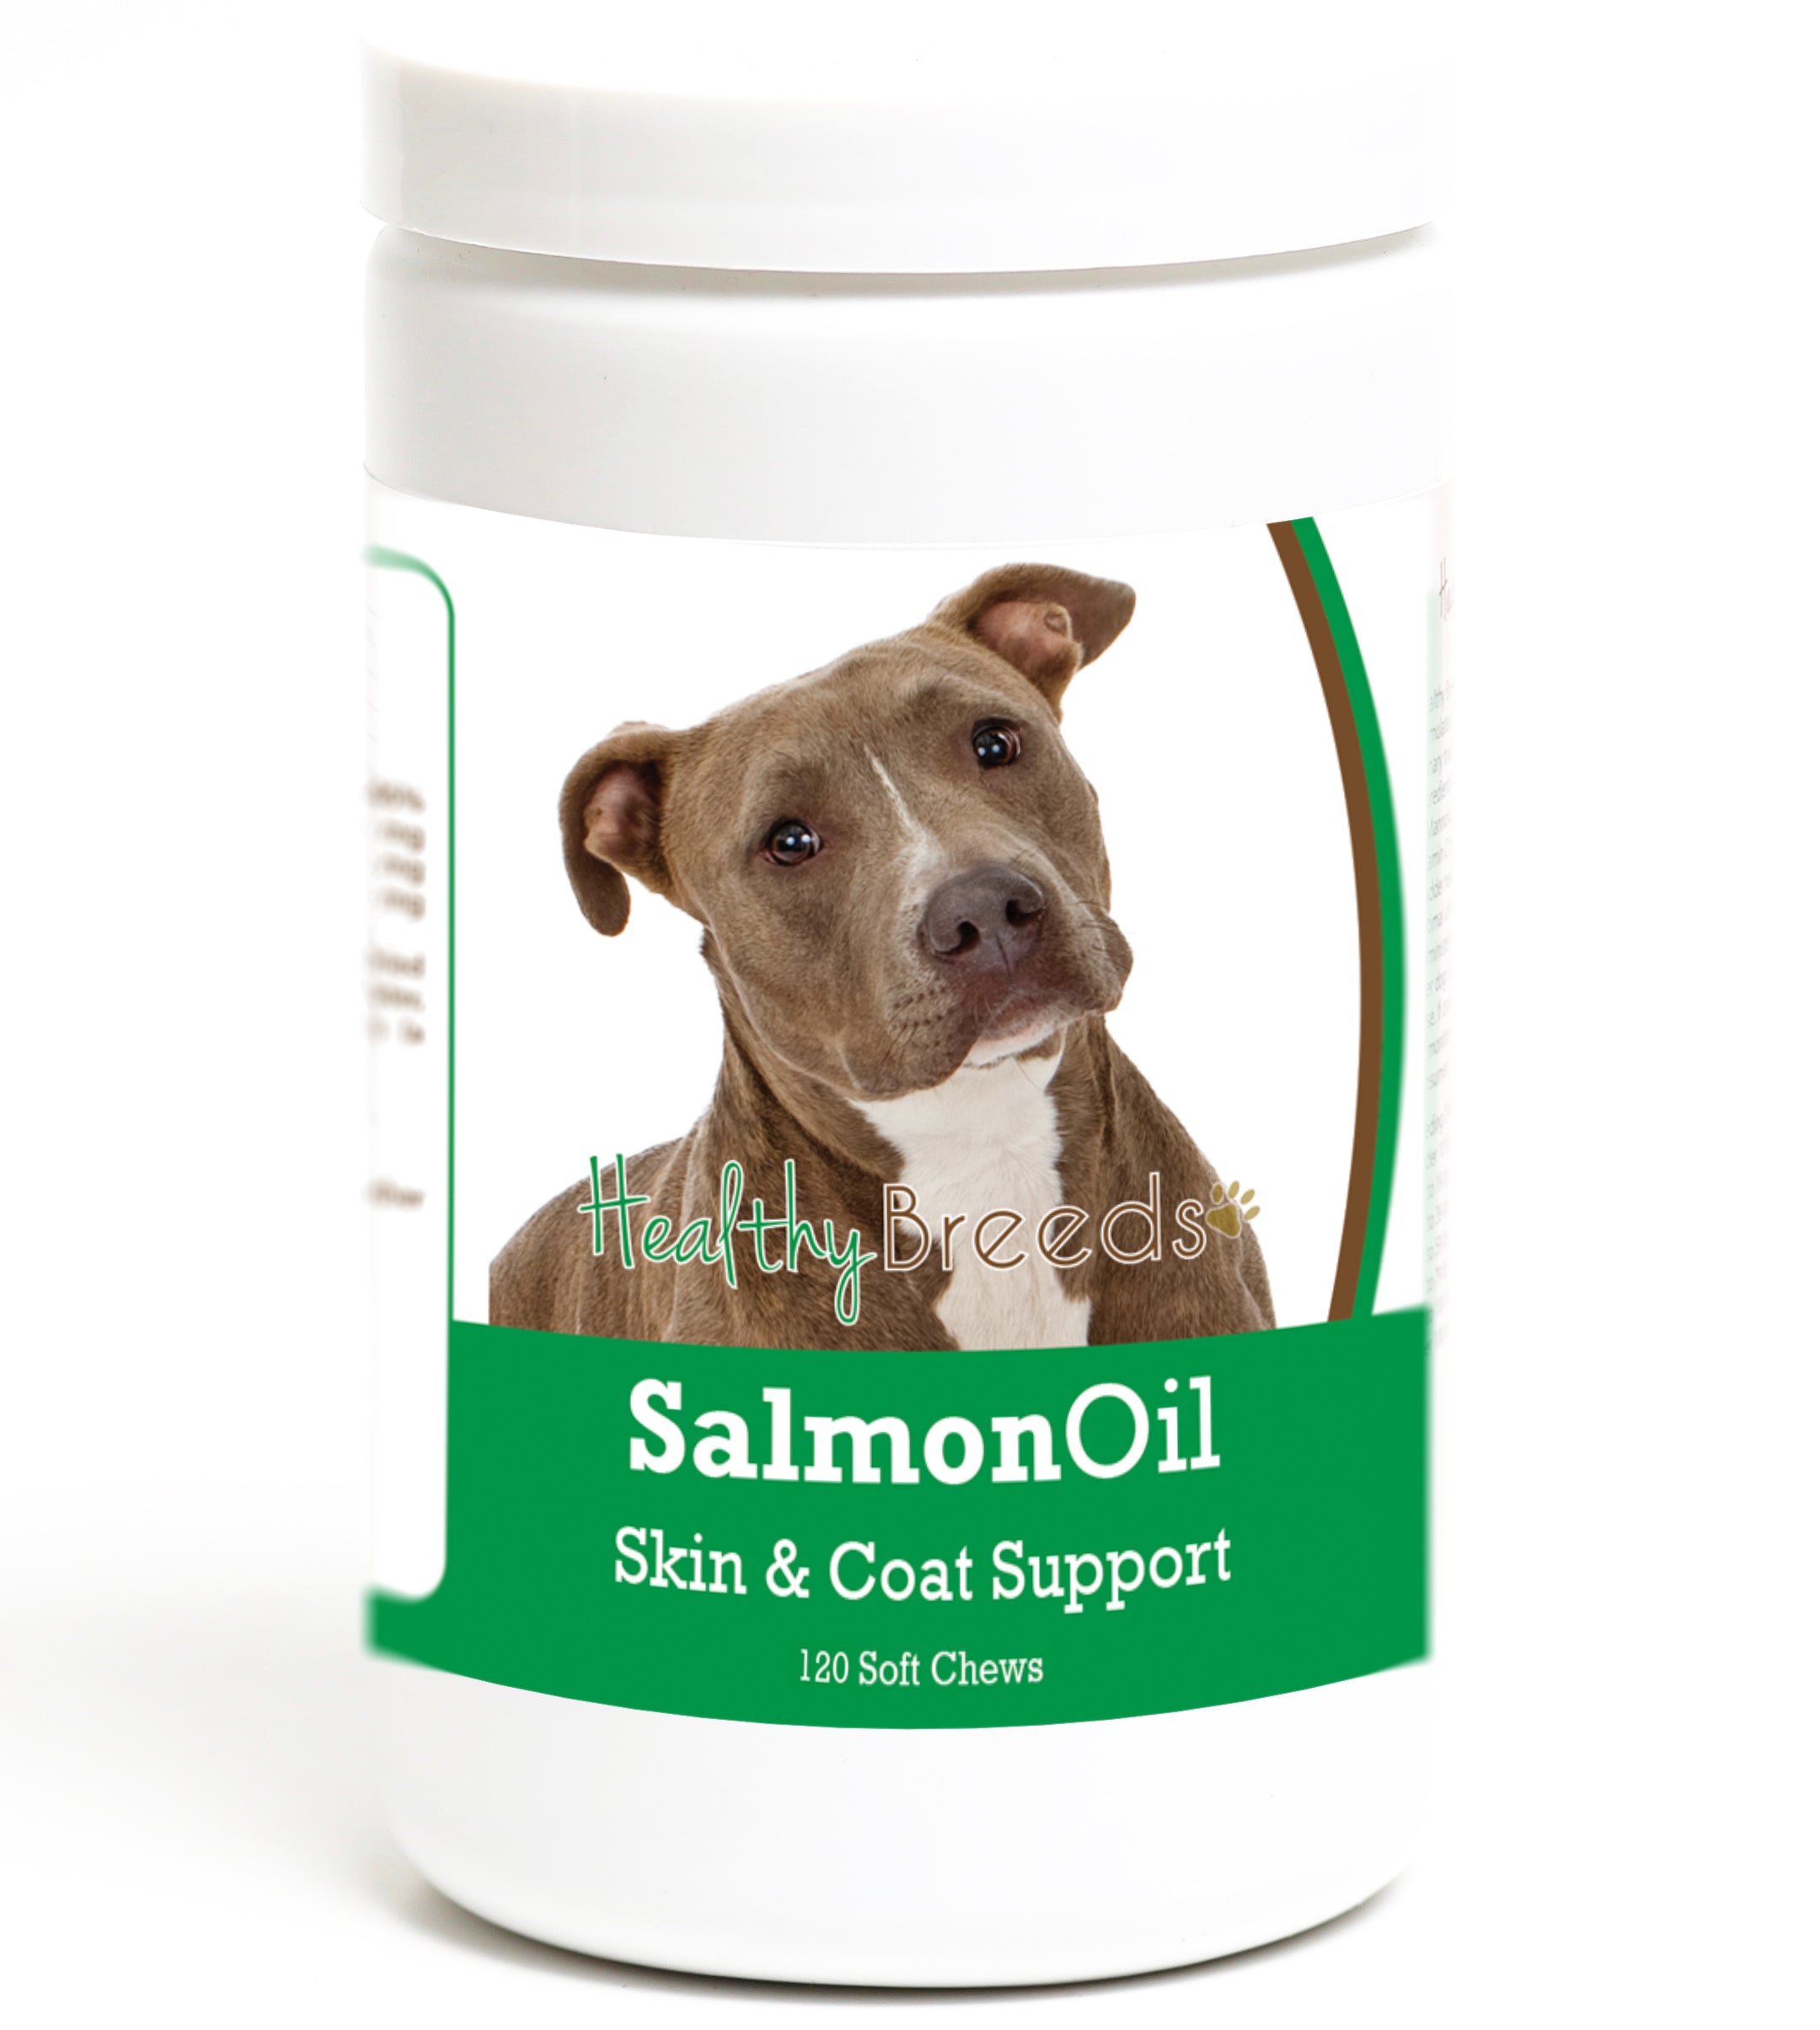 Pit Bull Salmon Oil Soft Chews 120 Count